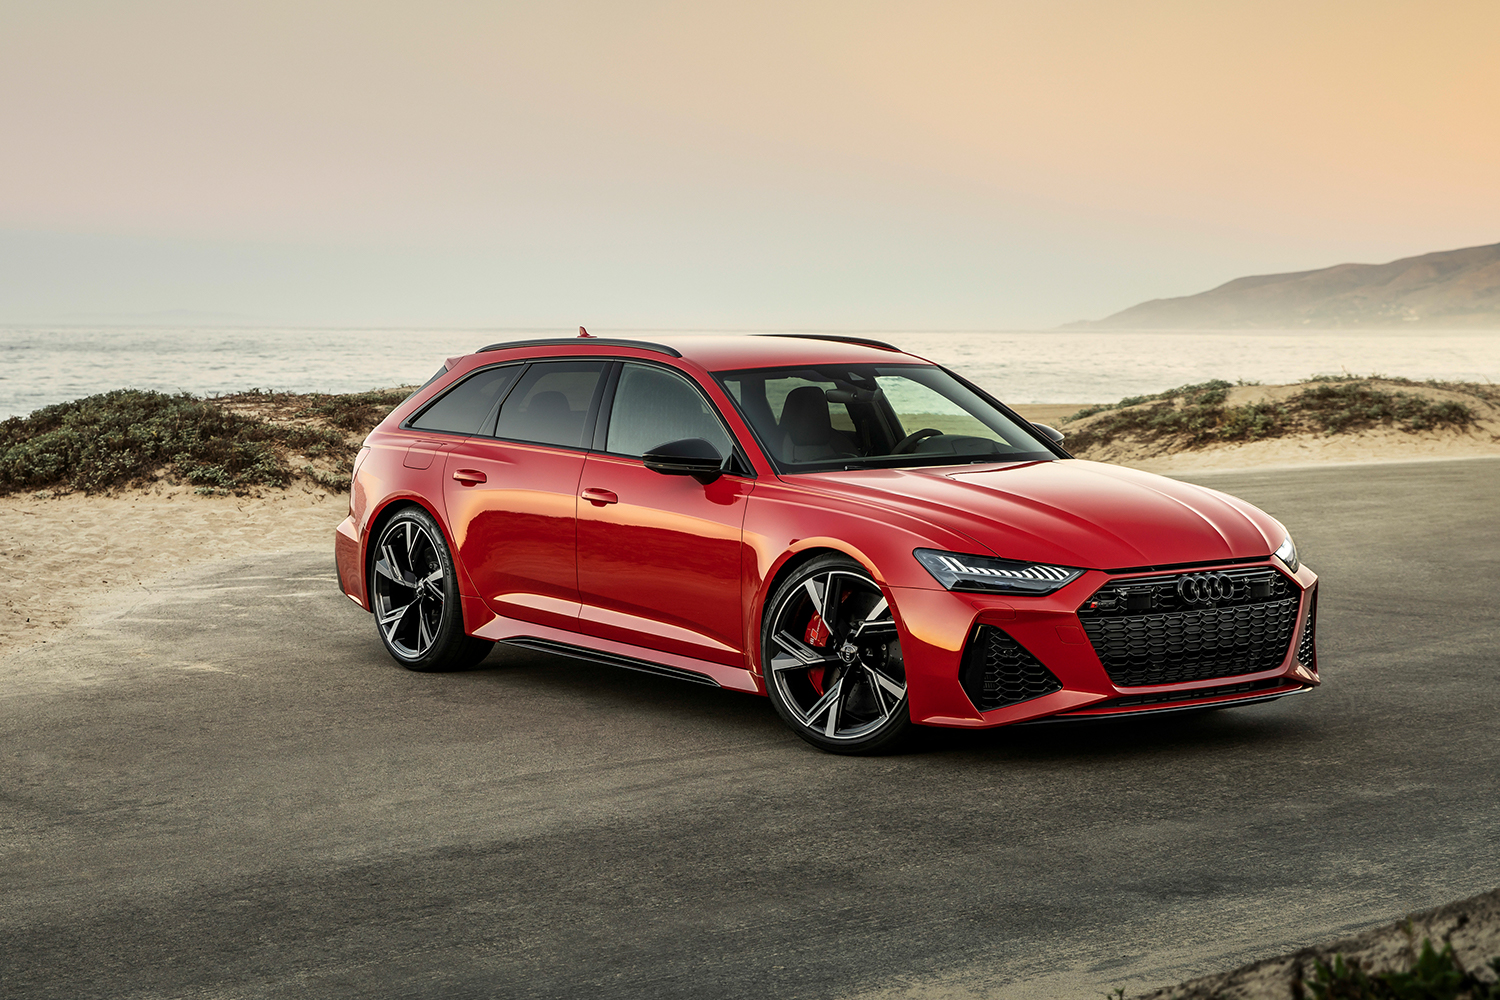 The Audi RS6 Avant, one of our favorite vehicles of 2021